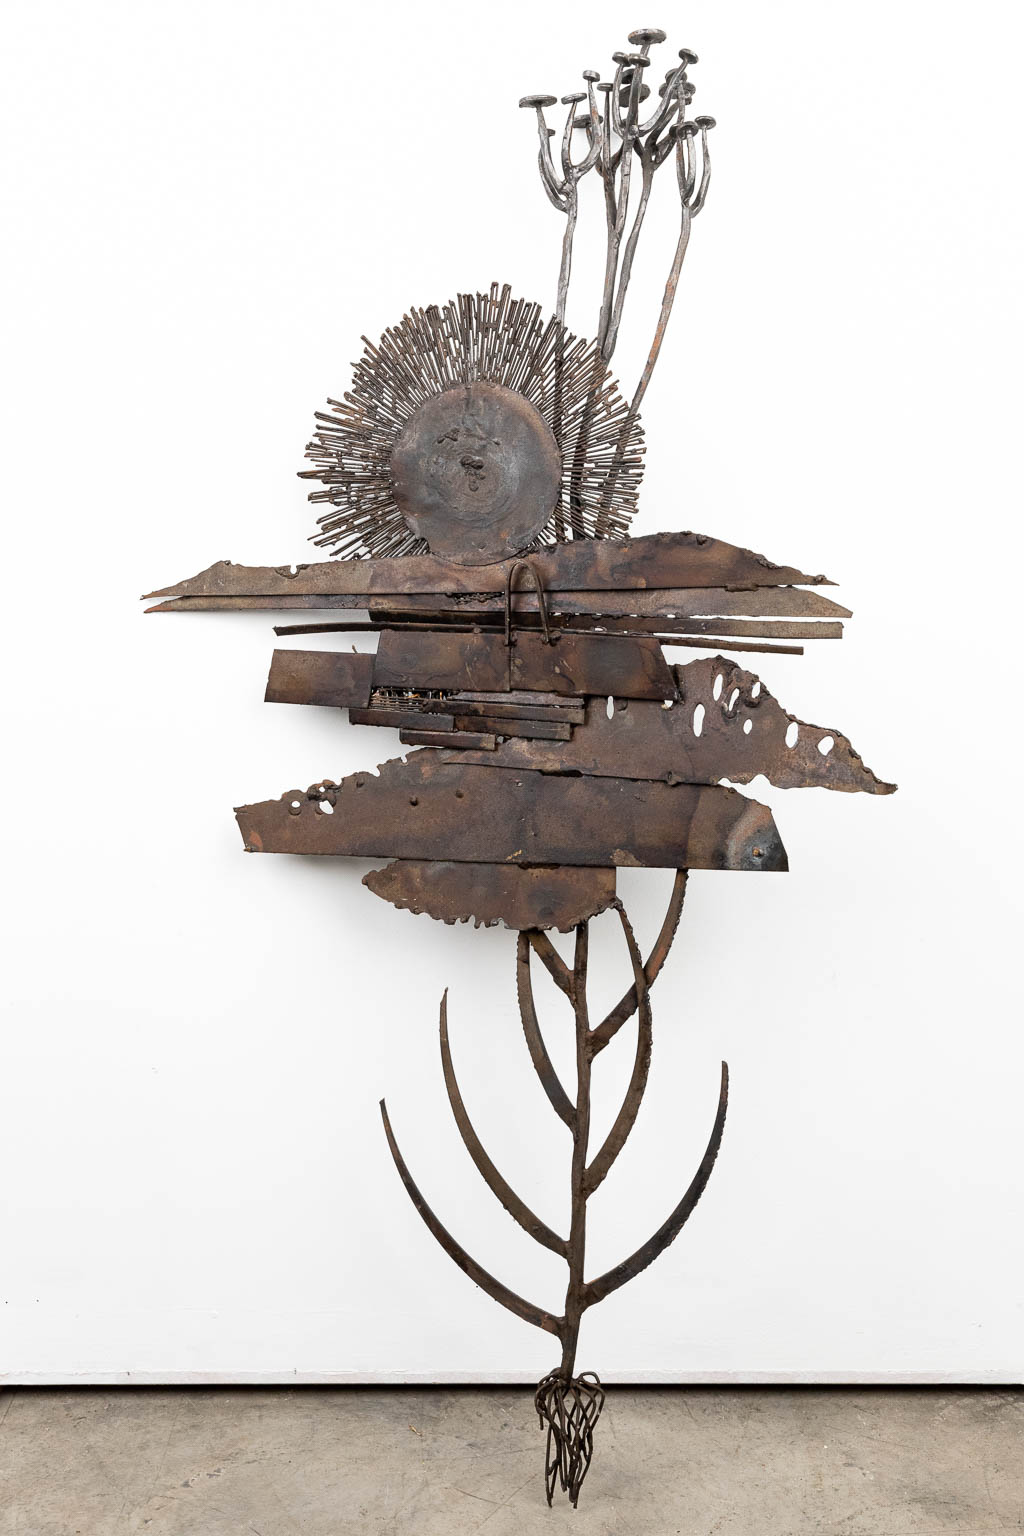 Jef CLAERHOUT (1937) a wall sculpture made of steel. (70 x 124 cm)